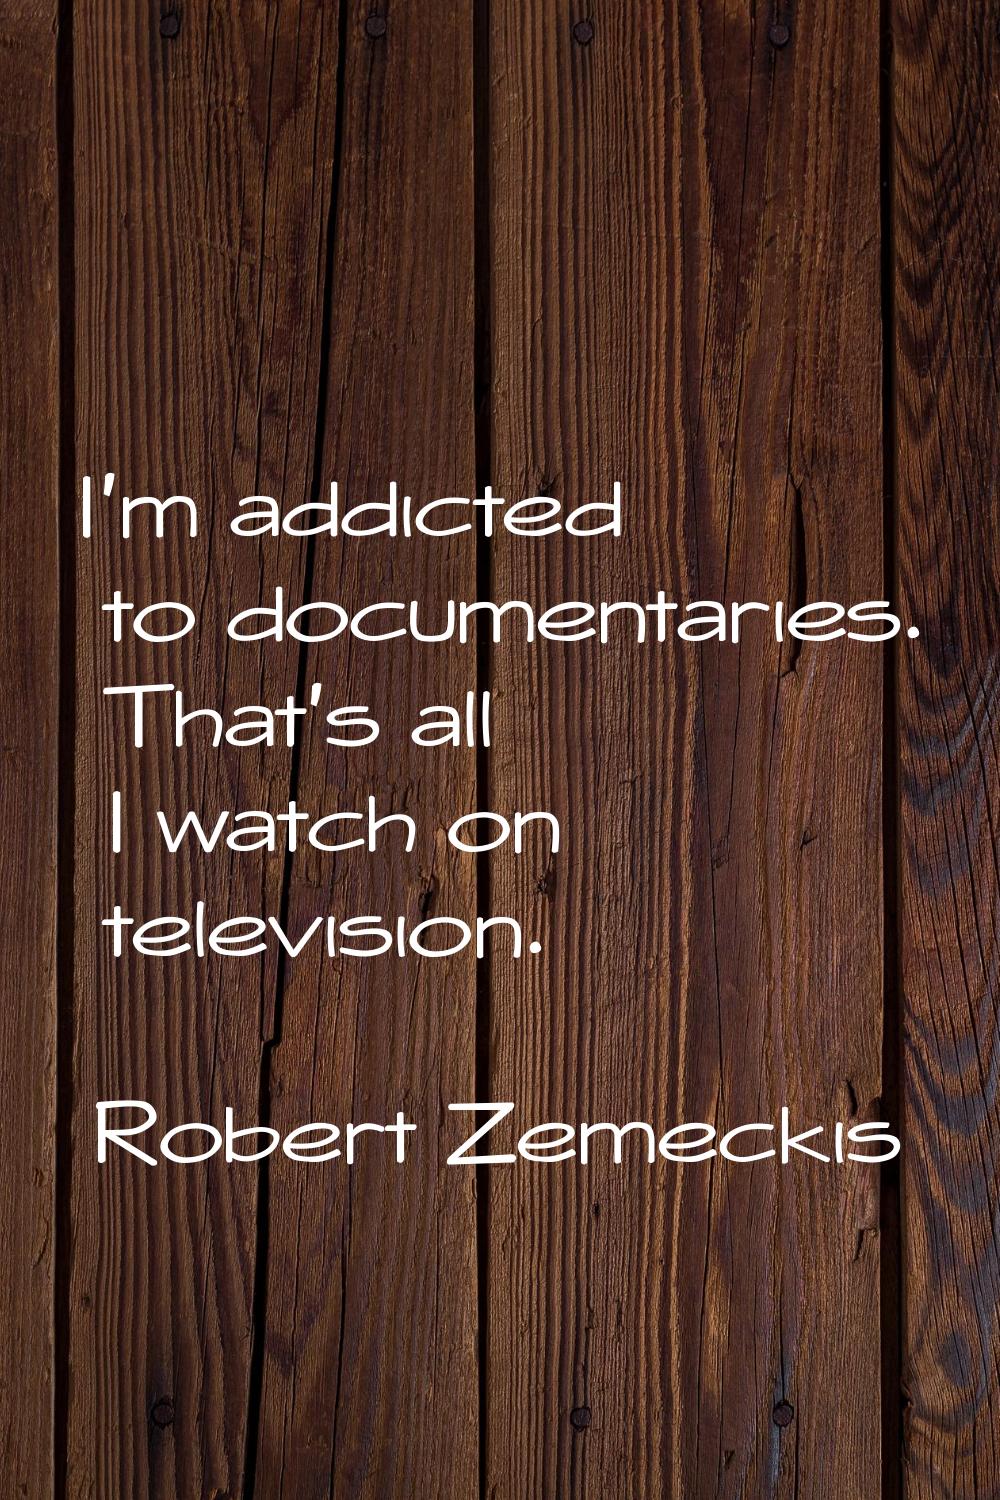 I'm addicted to documentaries. That's all I watch on television.